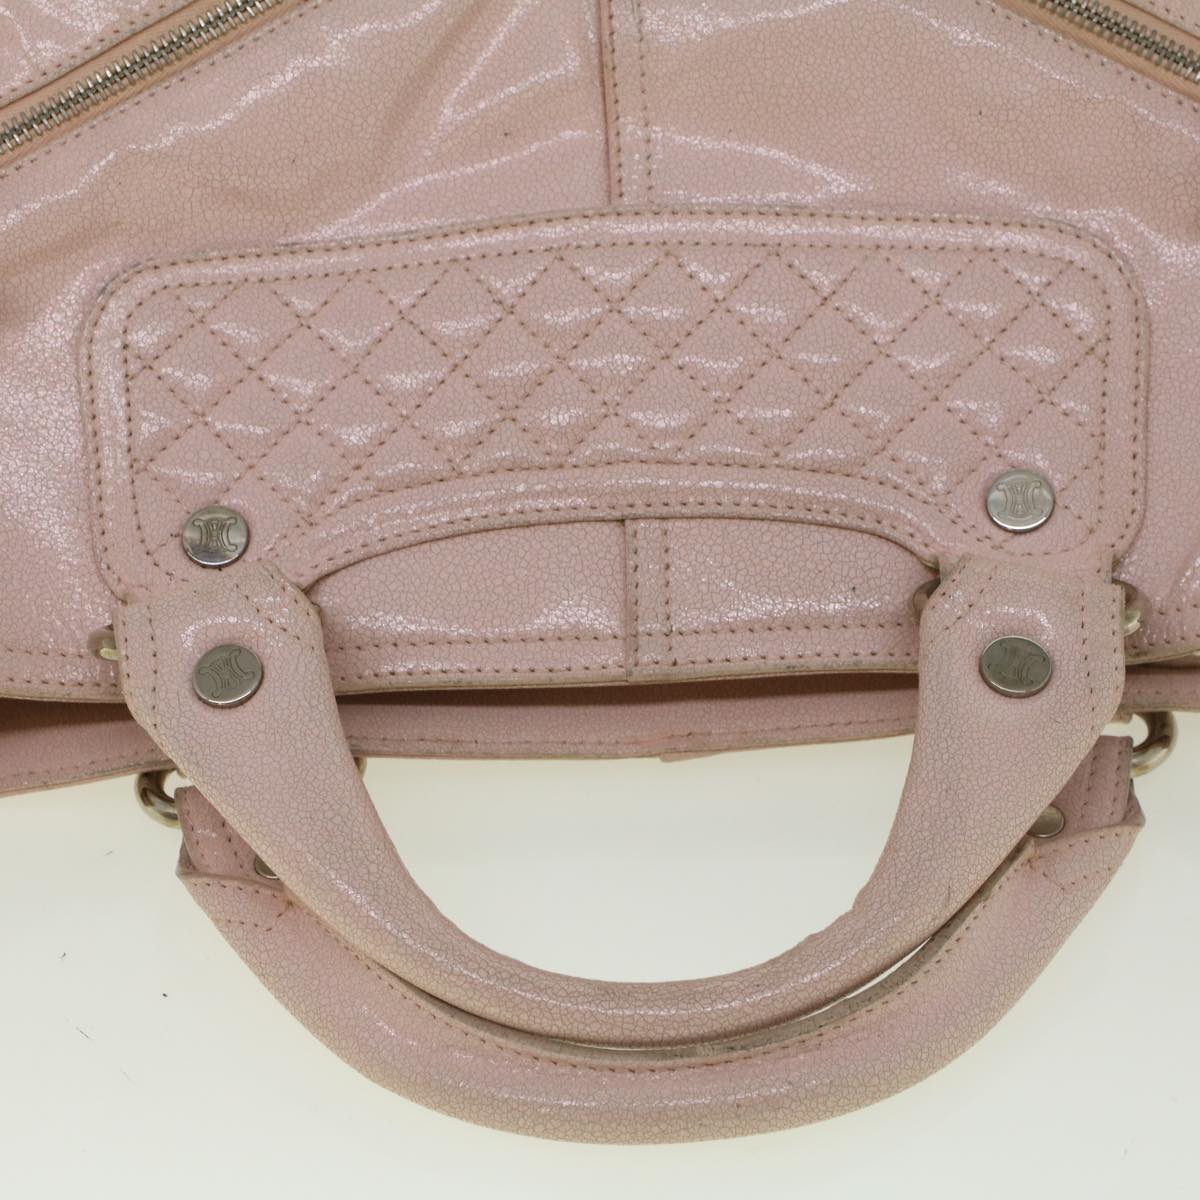 CELINE Hand Bag Leather Pink Auth bs9529